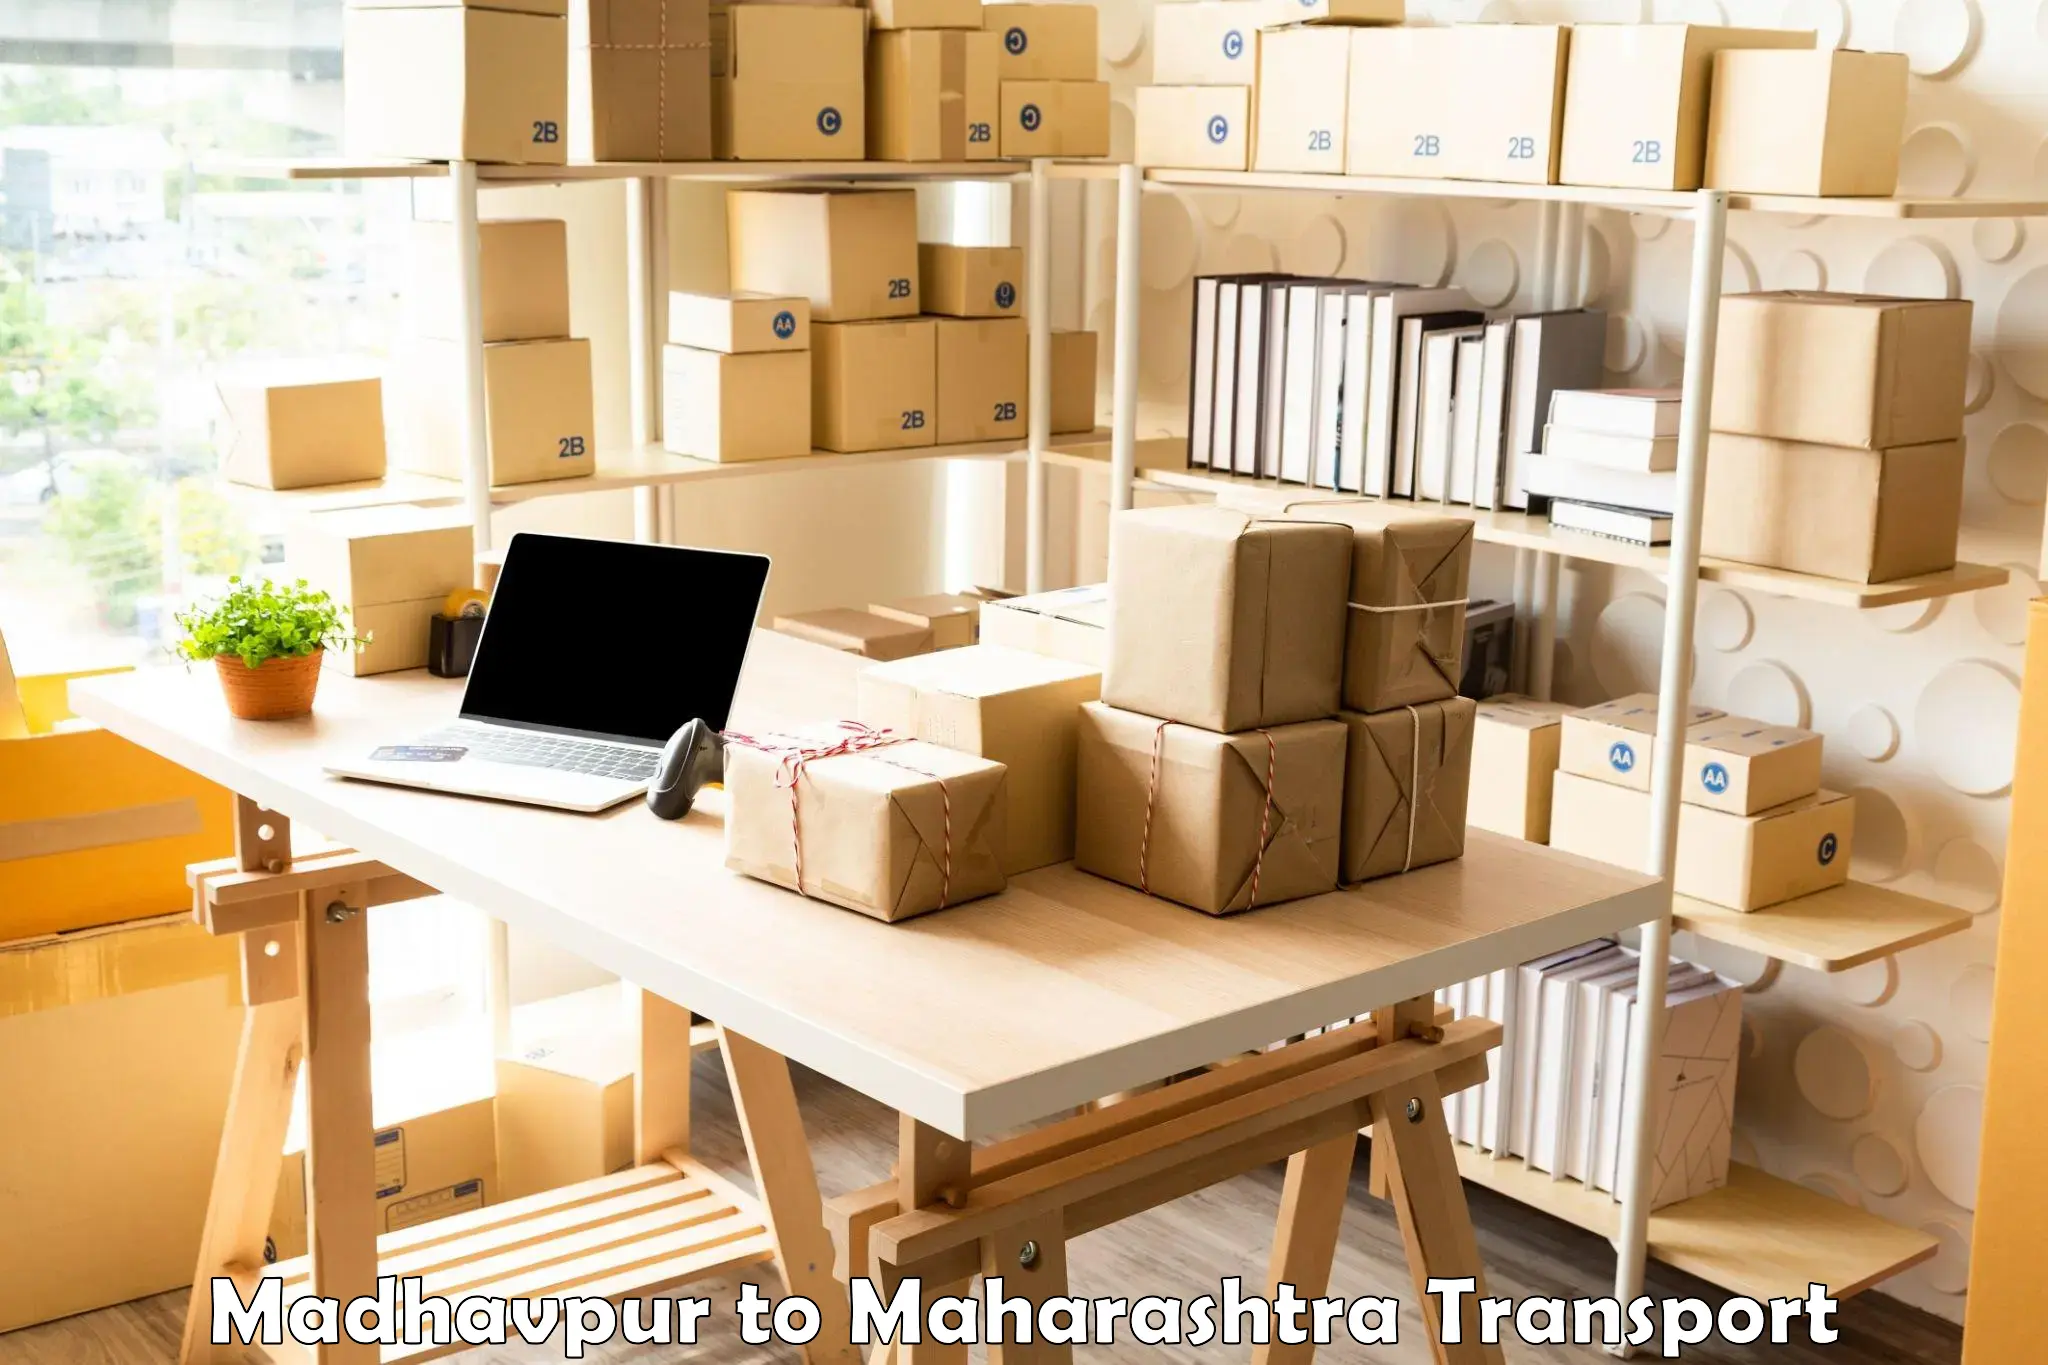 Road transport online services in Madhavpur to Malegaon